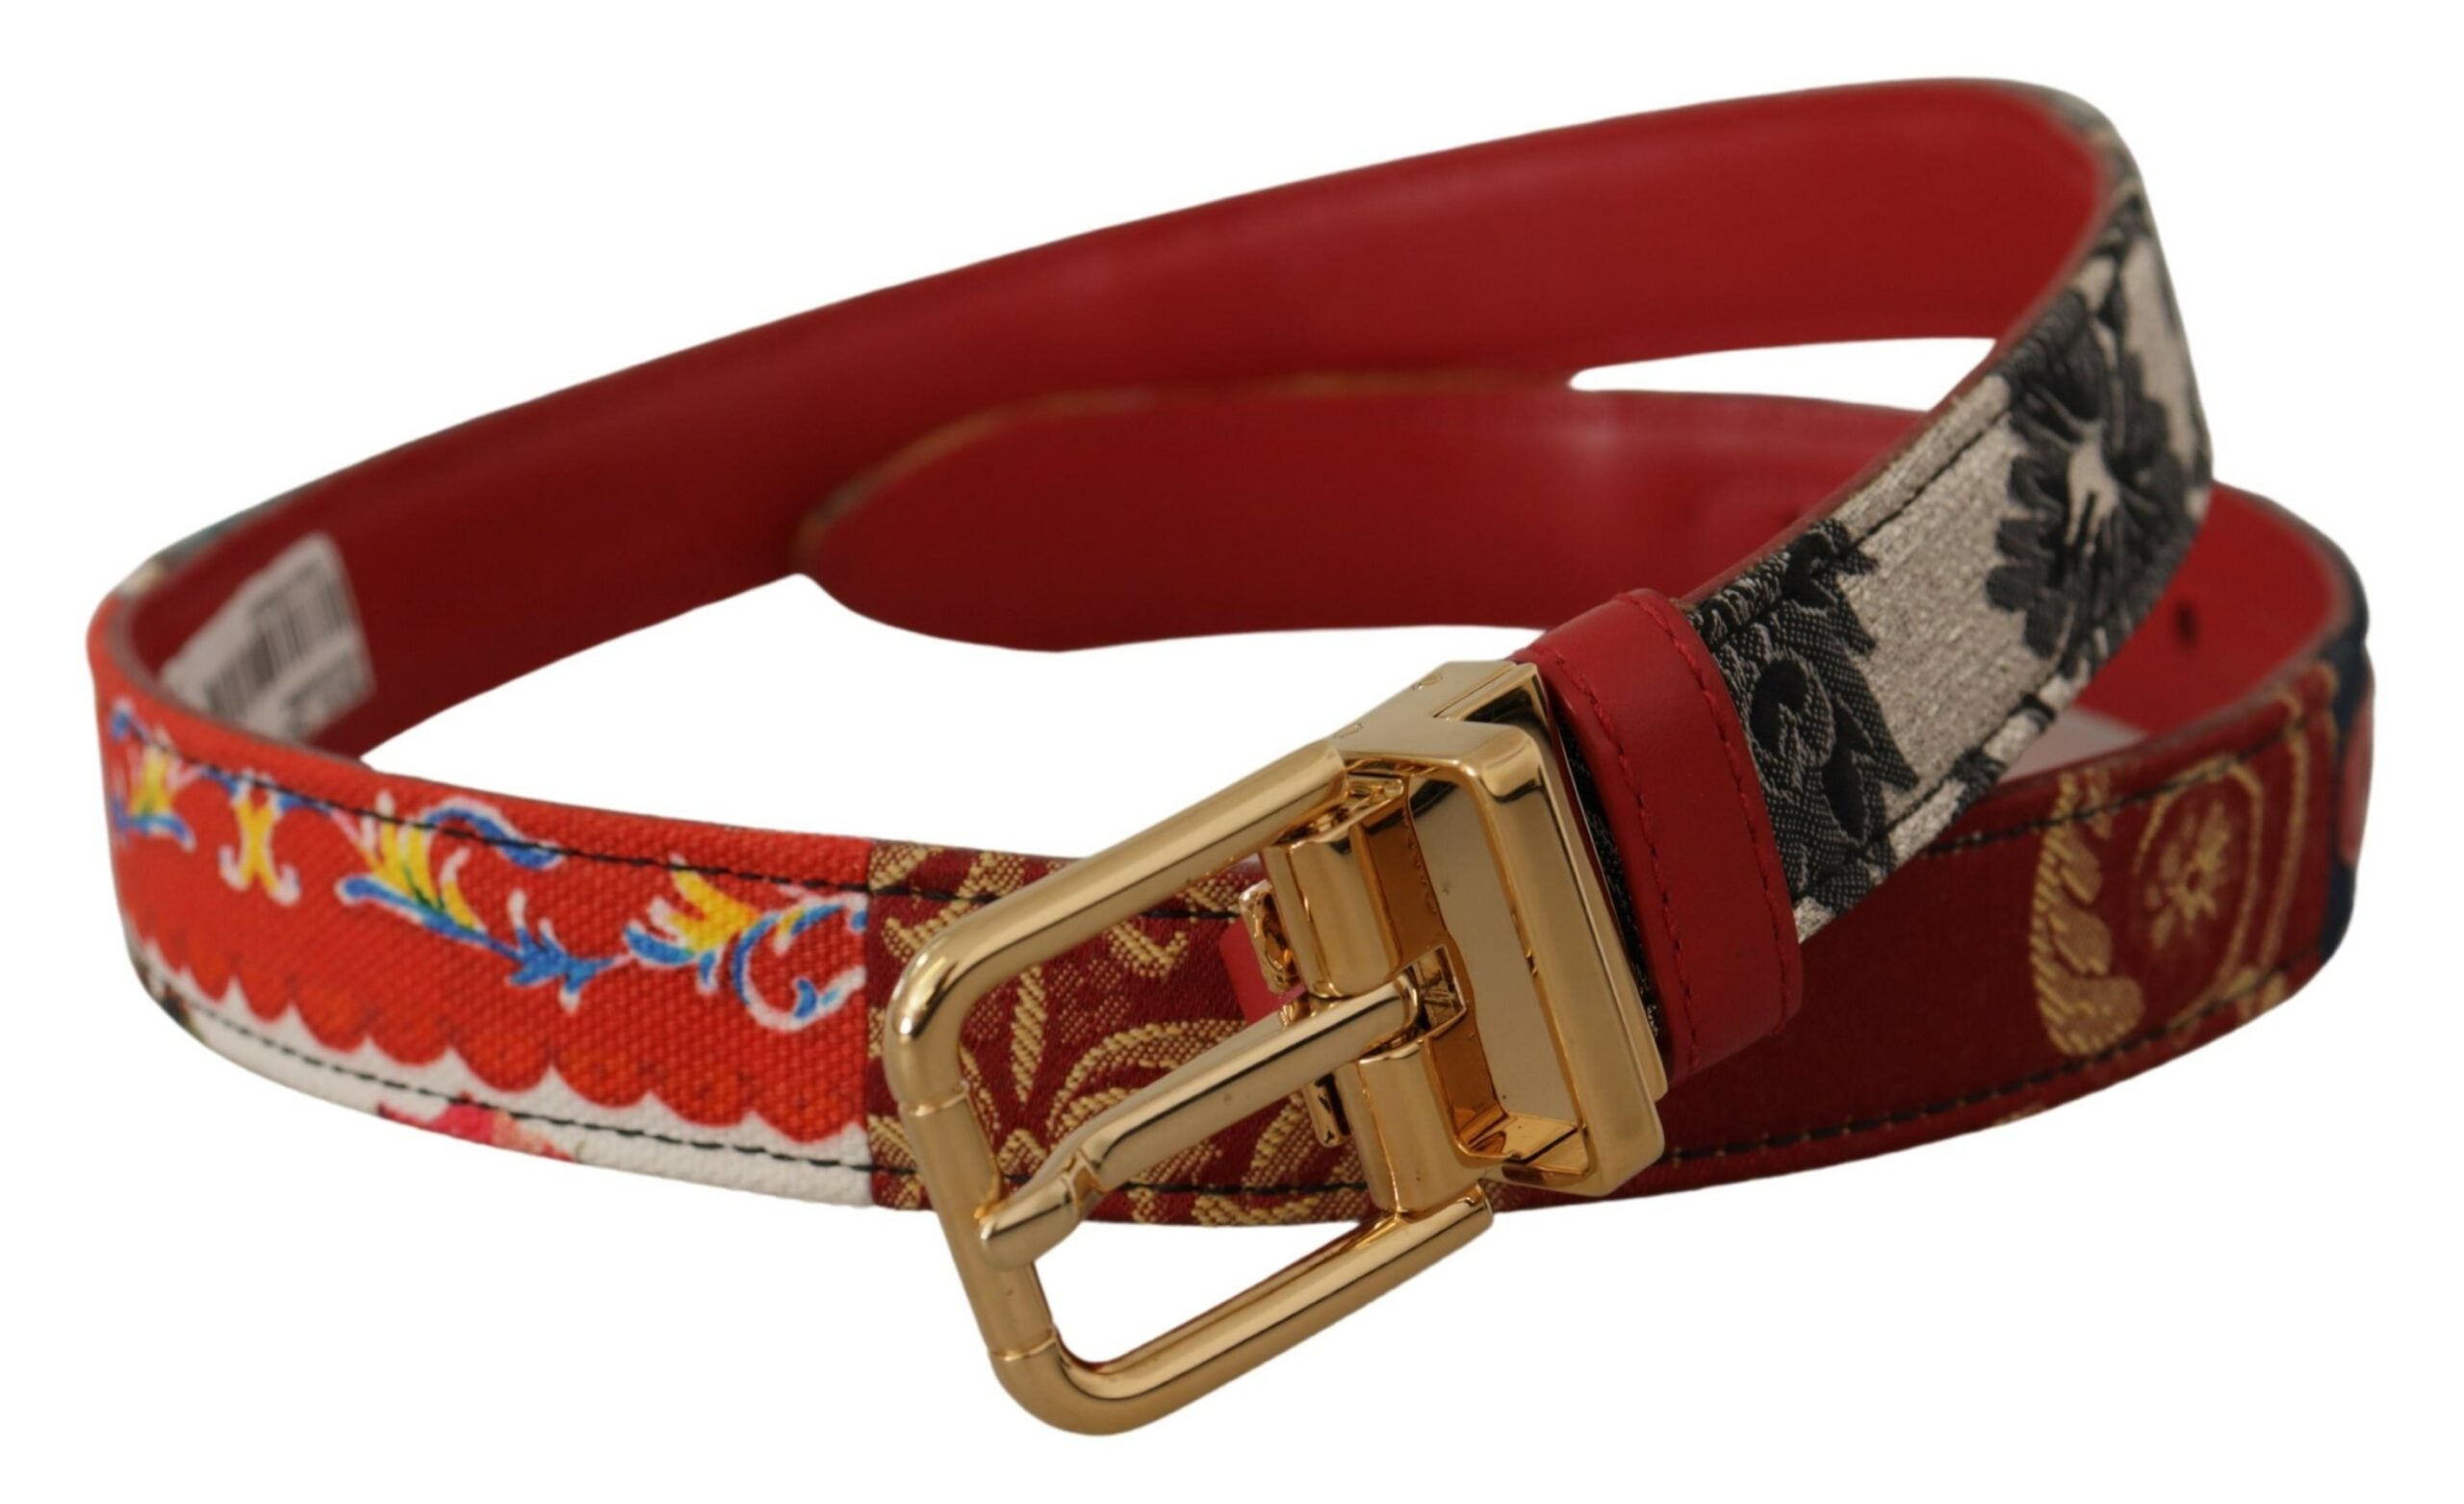 Dolce & Gabbana Chic Multicolor Leather Belt with Engraved Buckle